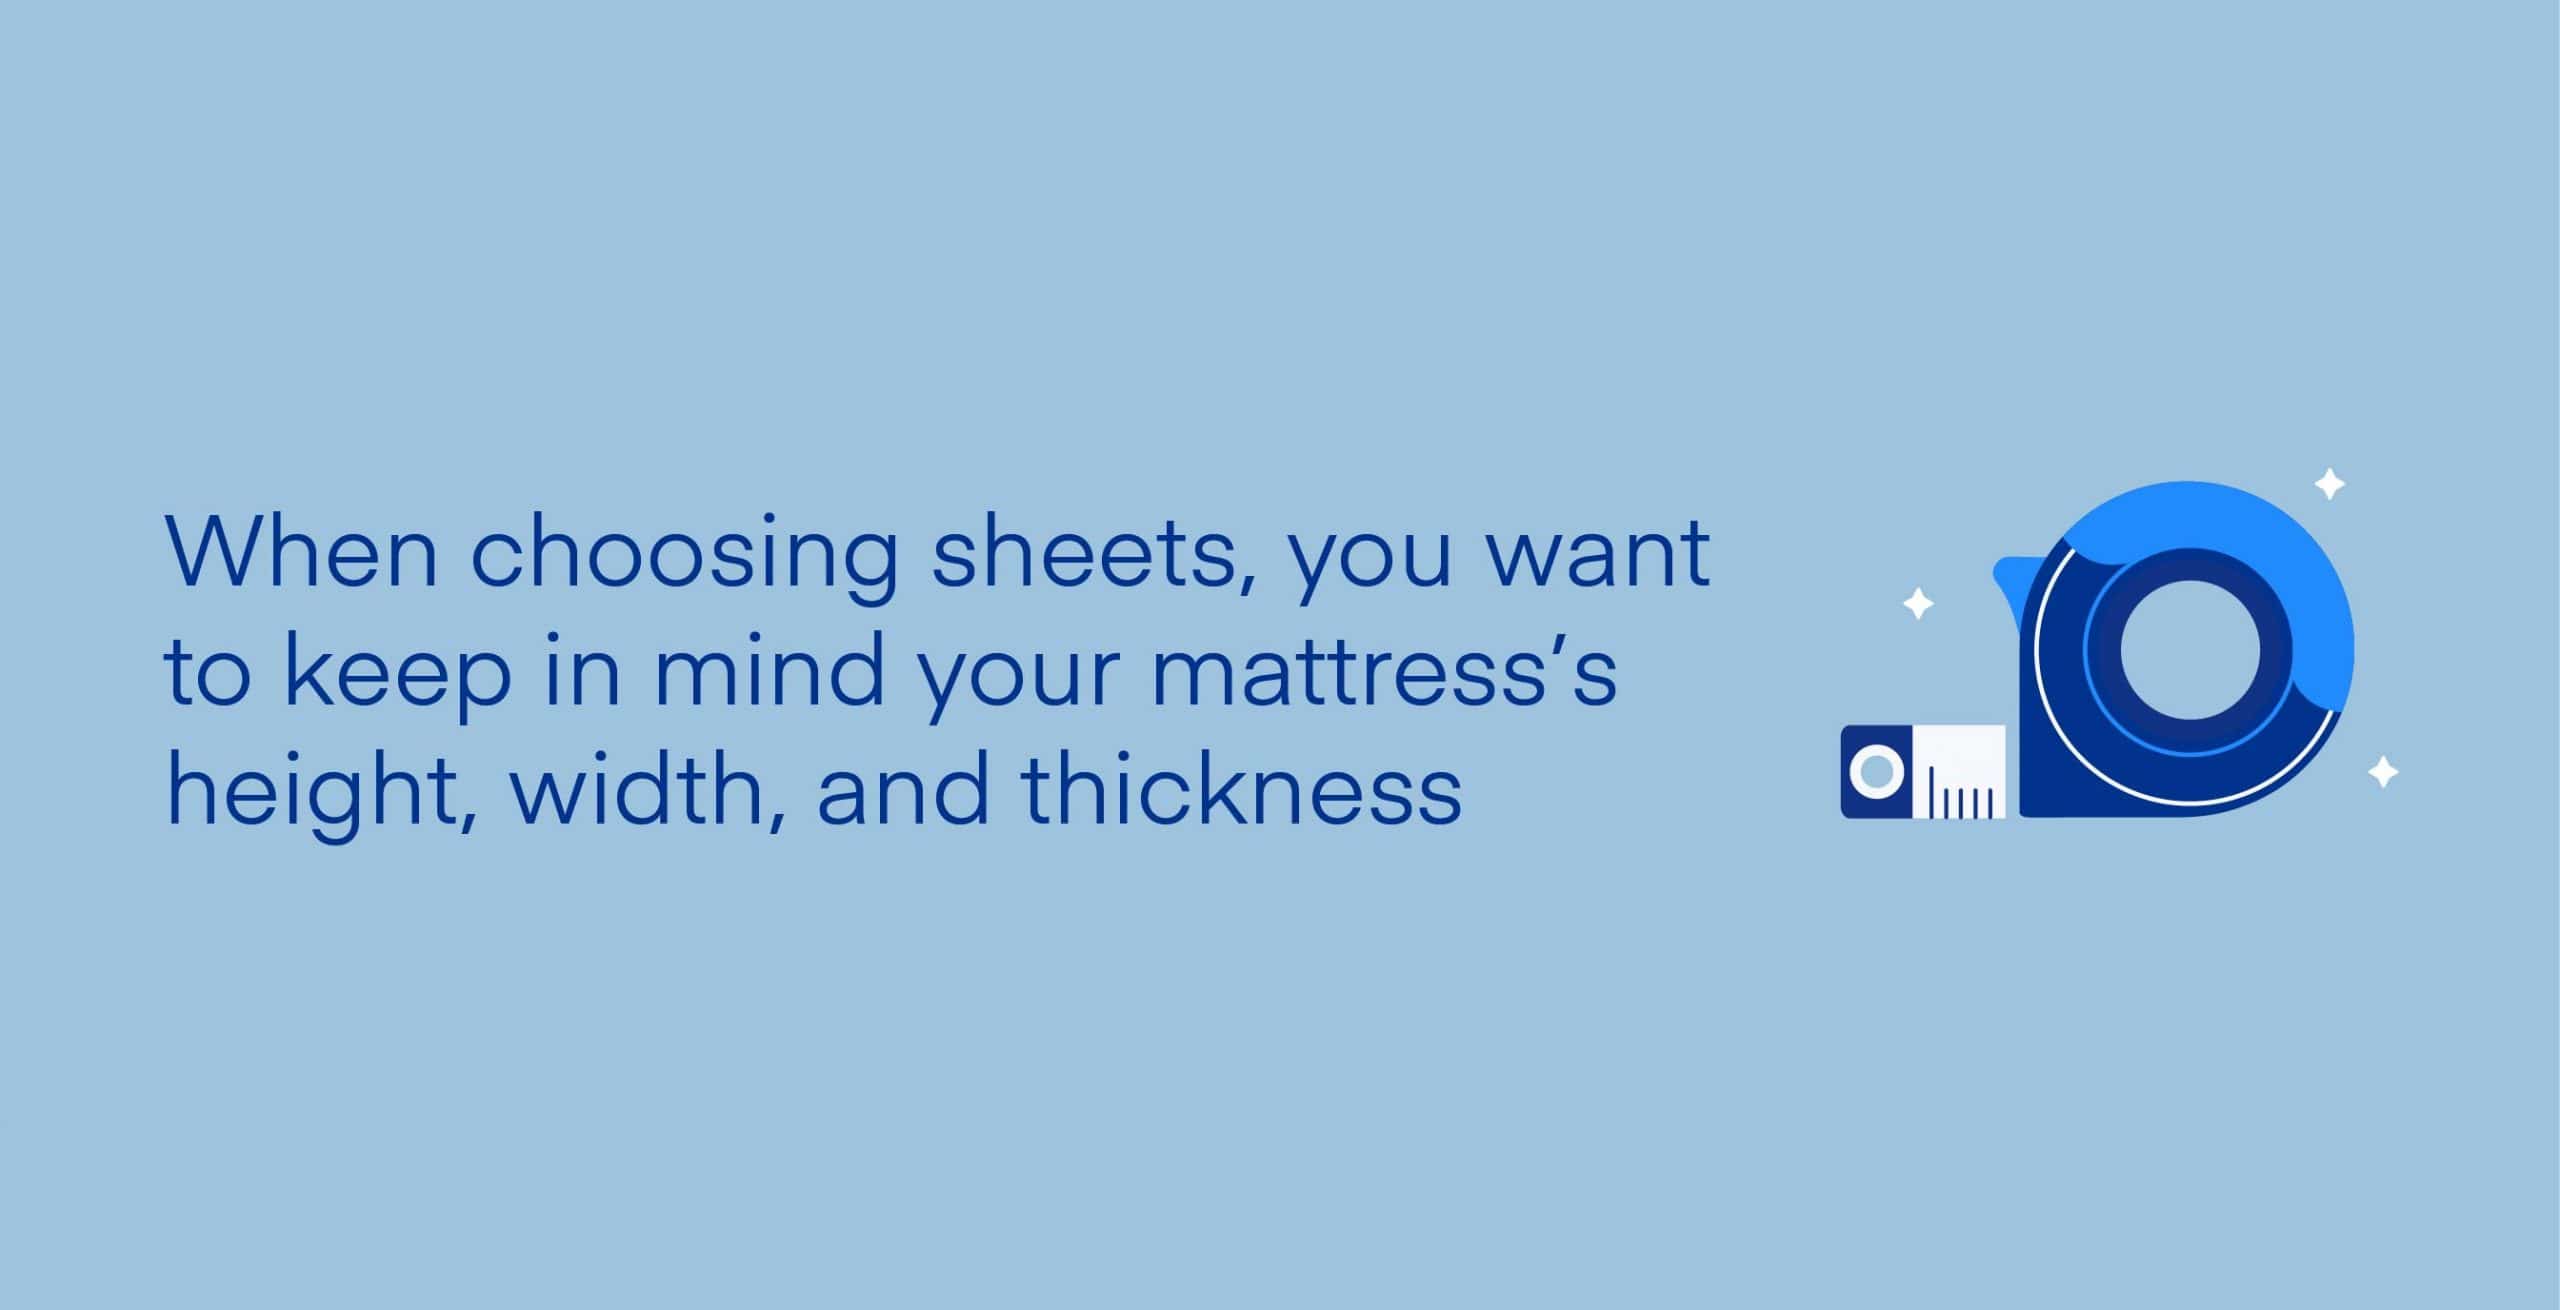 Bed Sheet Sizes And Dimensions Guide, King Bed Fitted Sheet Dimensions